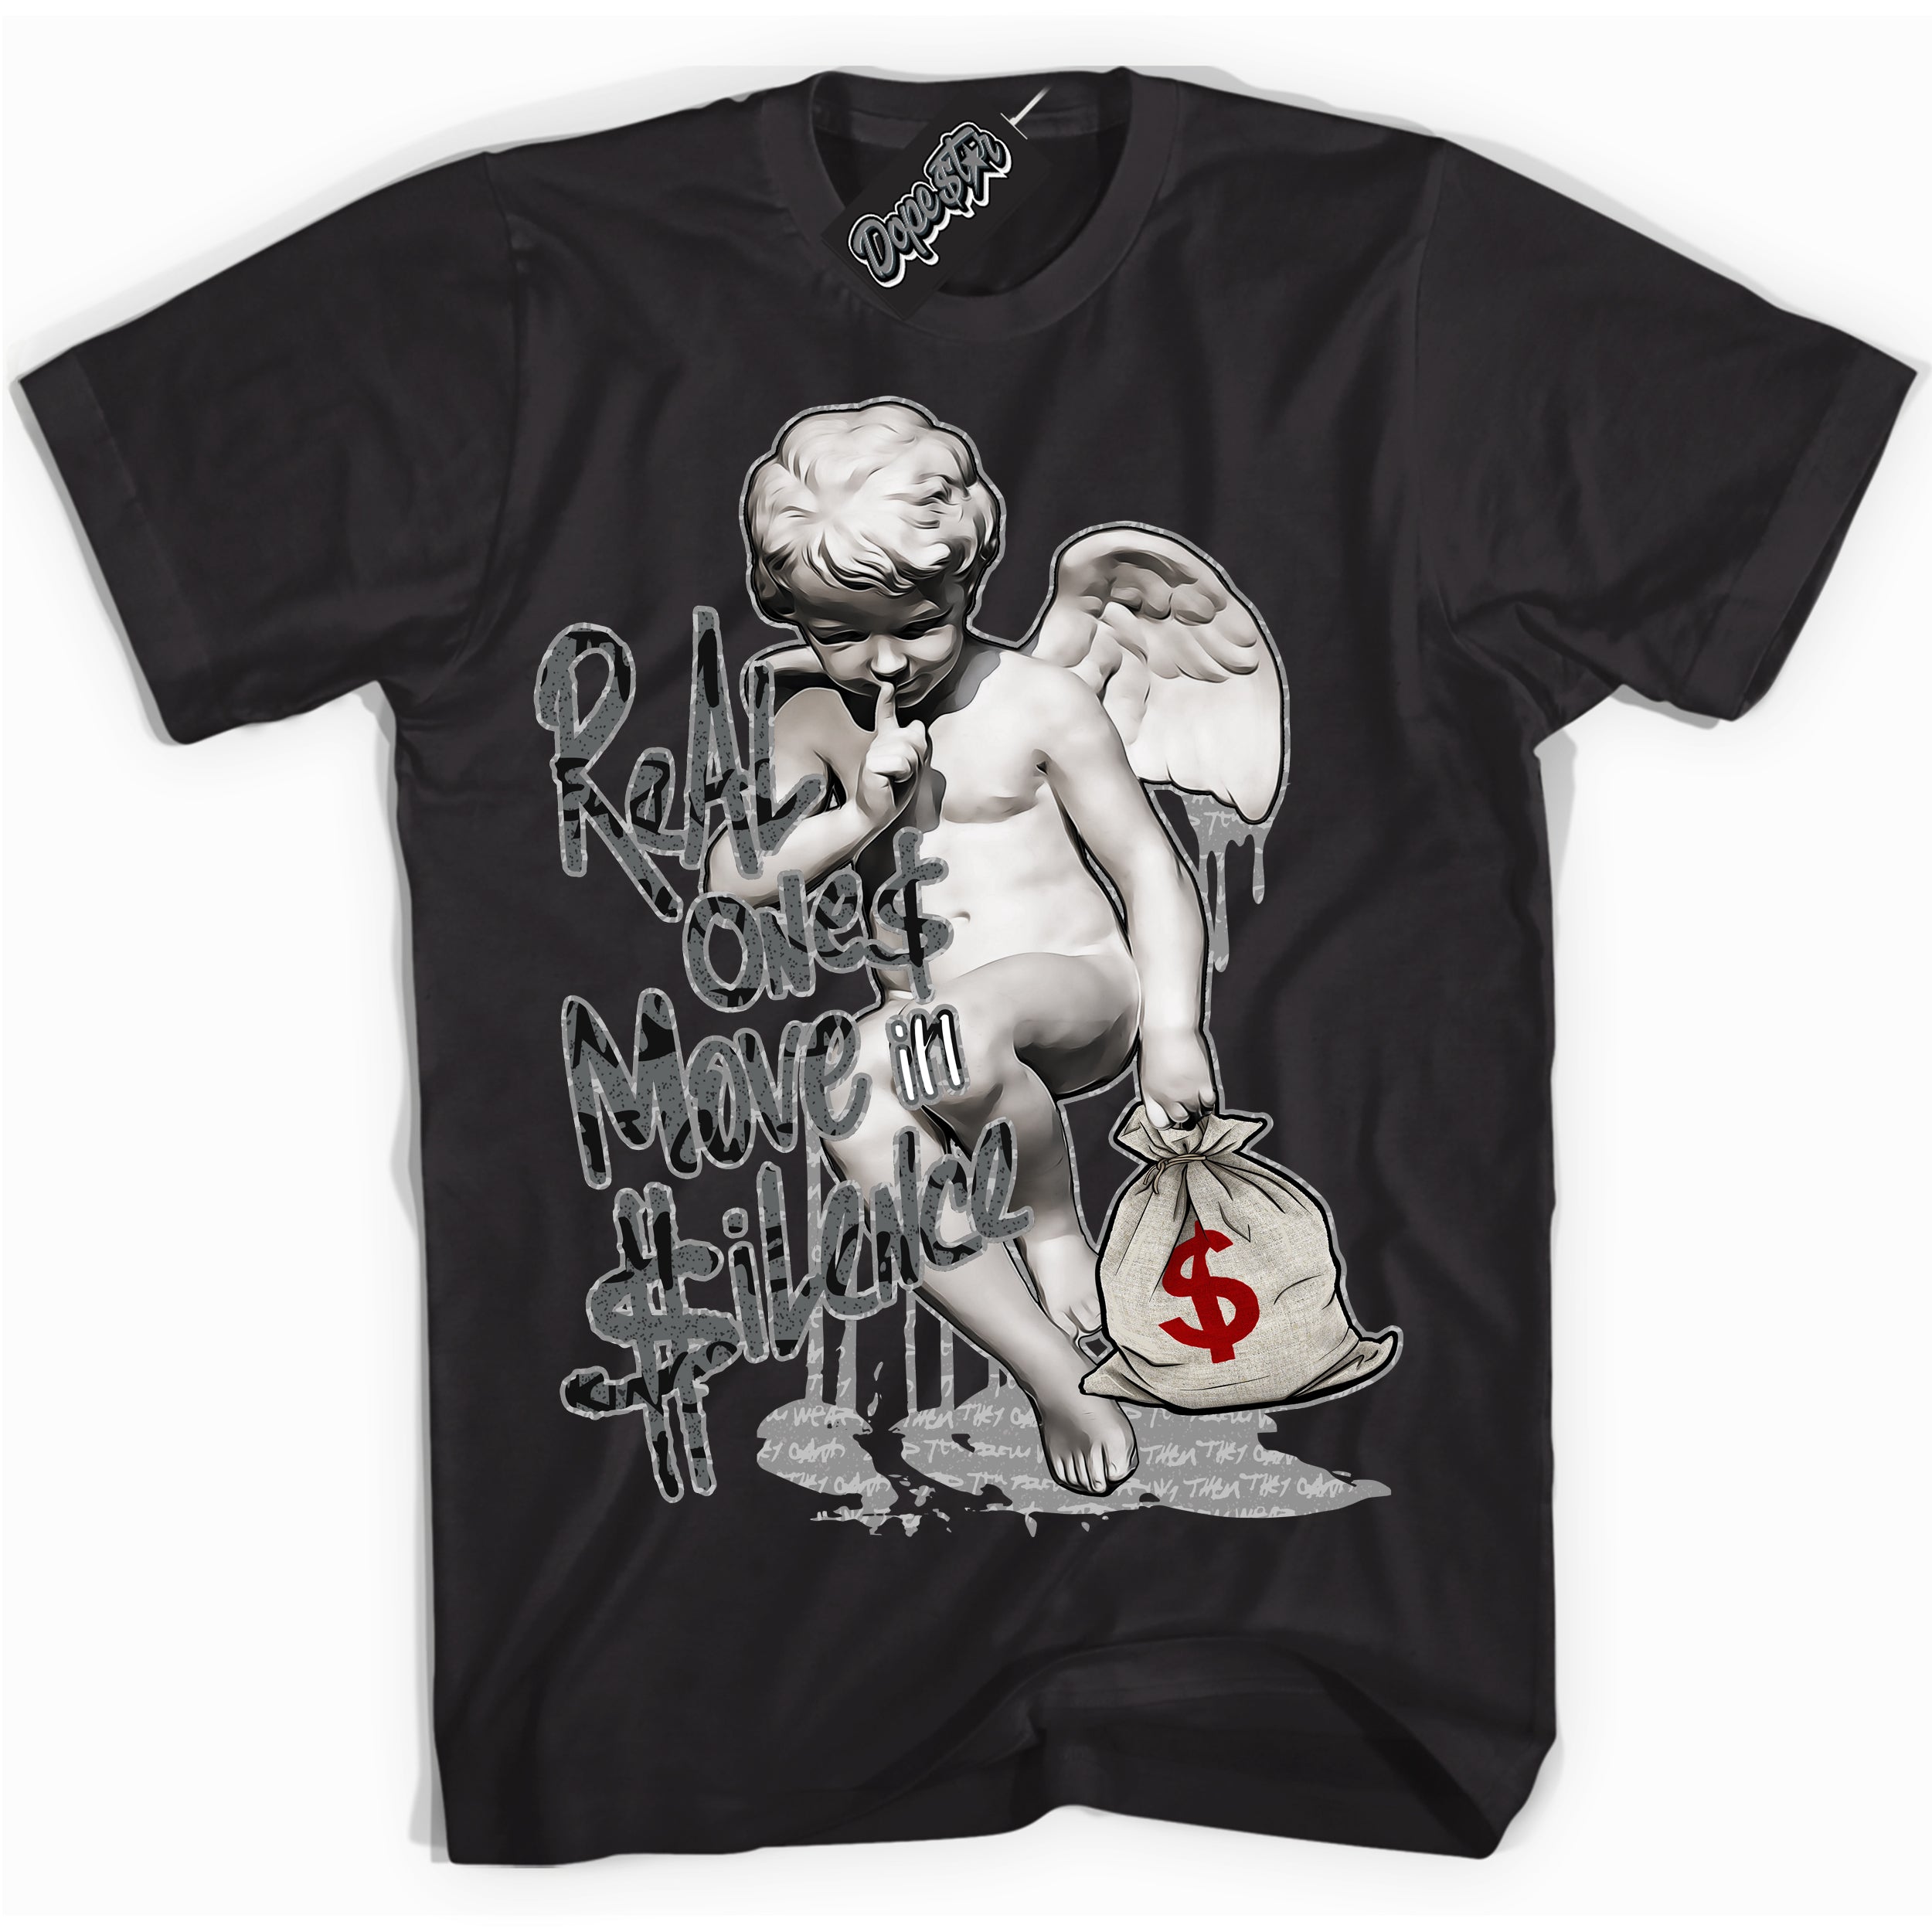 Cool Black Shirt with “ Real Ones Cherub ” design that perfectly matches Rebellionaire 1s Sneakers.